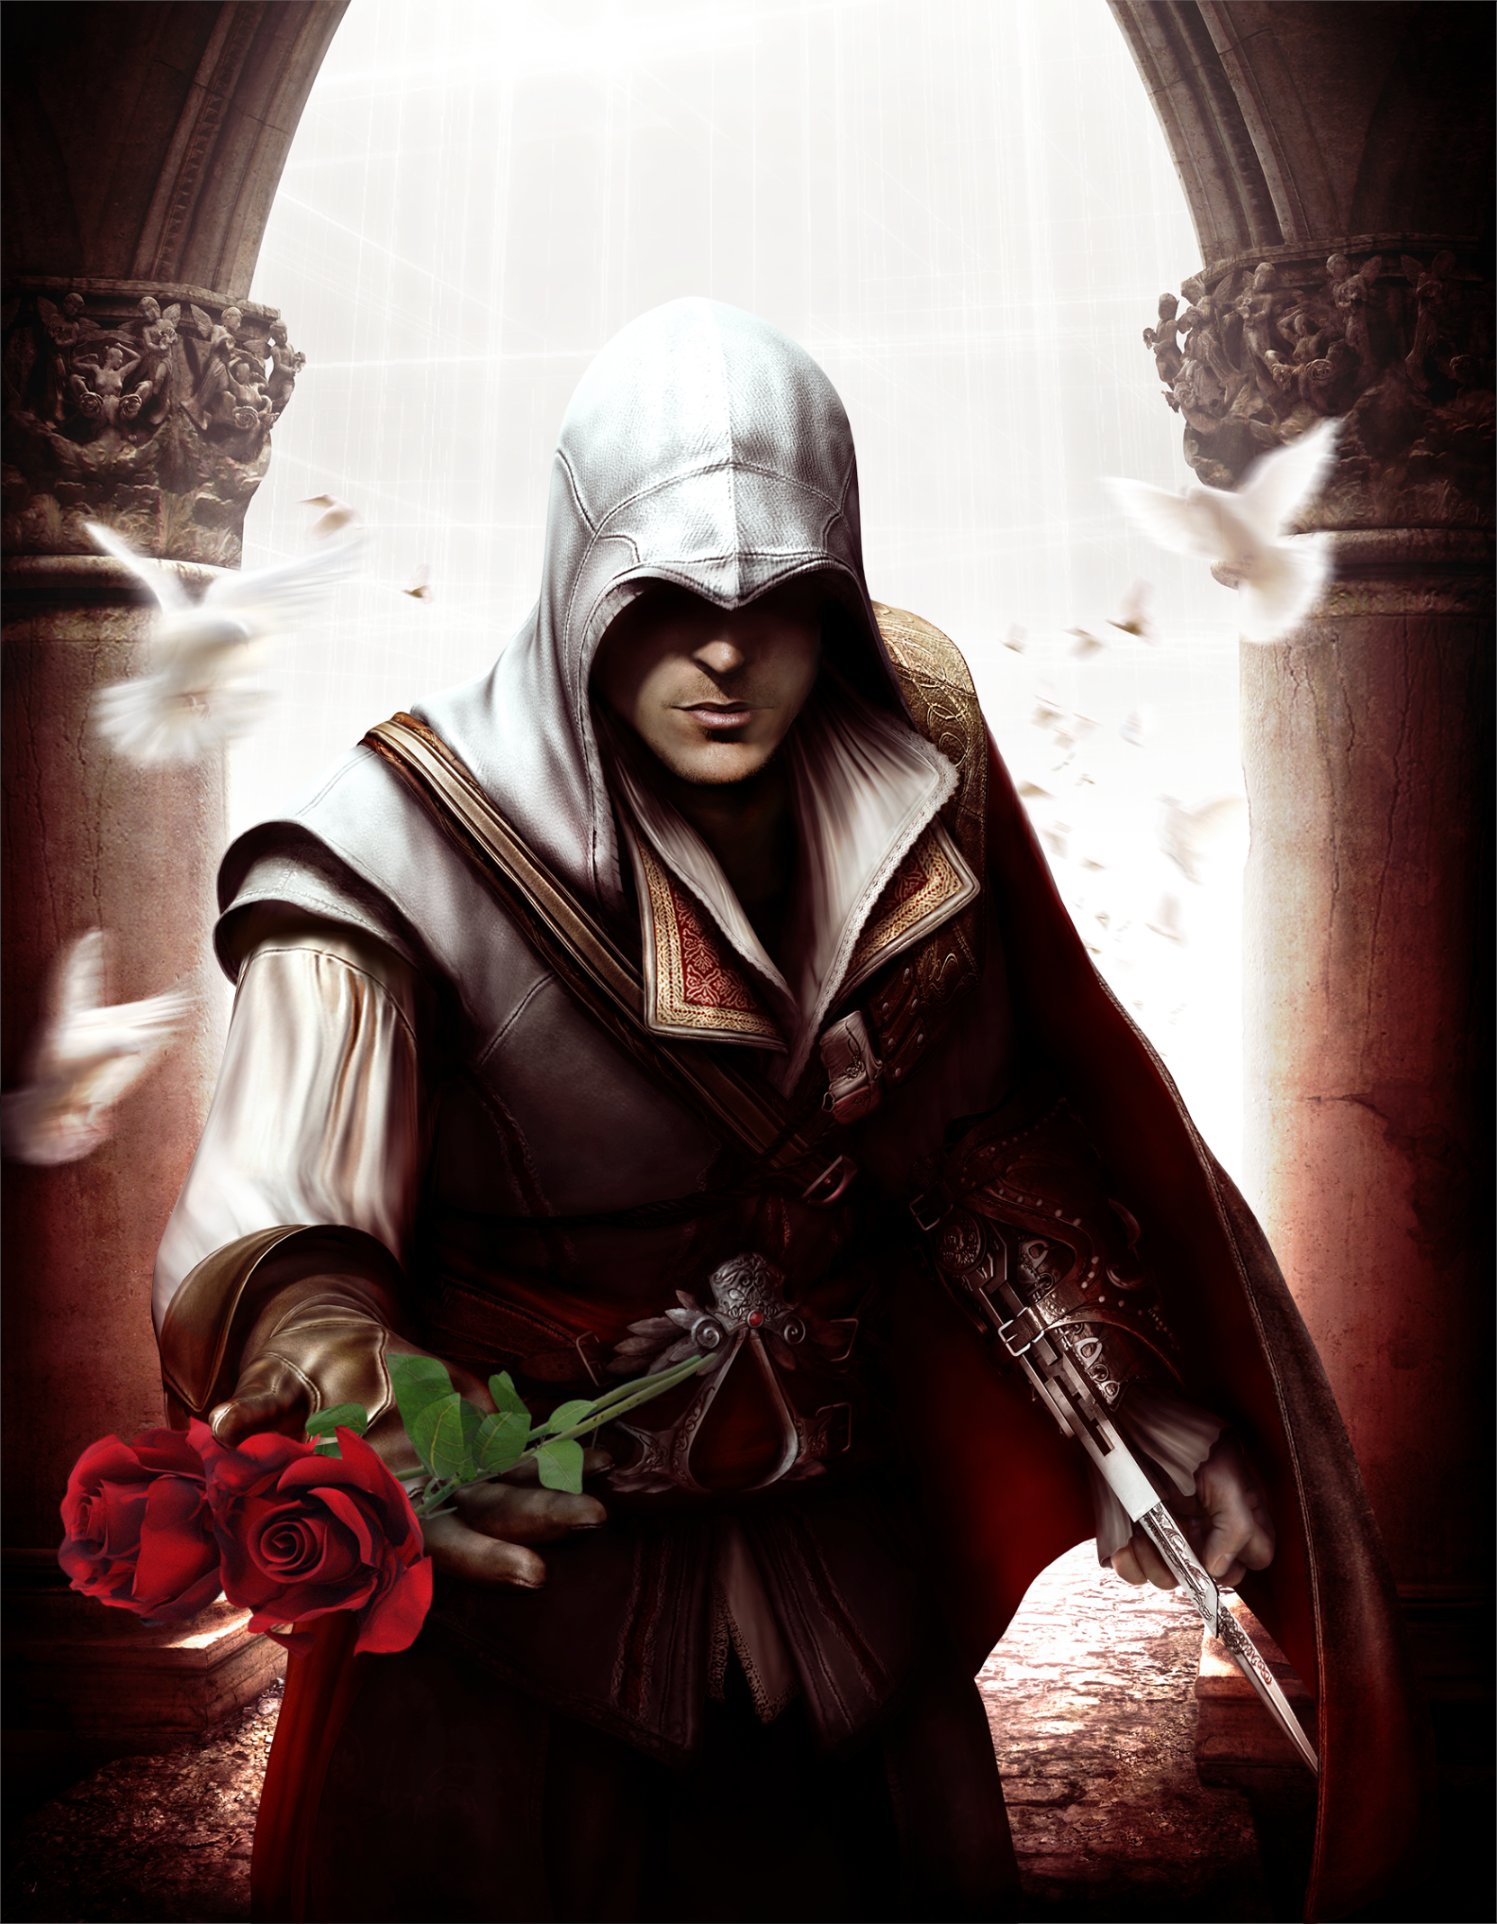 Assassin's Creed Twitter: "Roses are red, are blue; is and nothing is true... #AssassinsCreed #WorldPoetryDay https://t.co/inZTT2FFK6" / Twitter